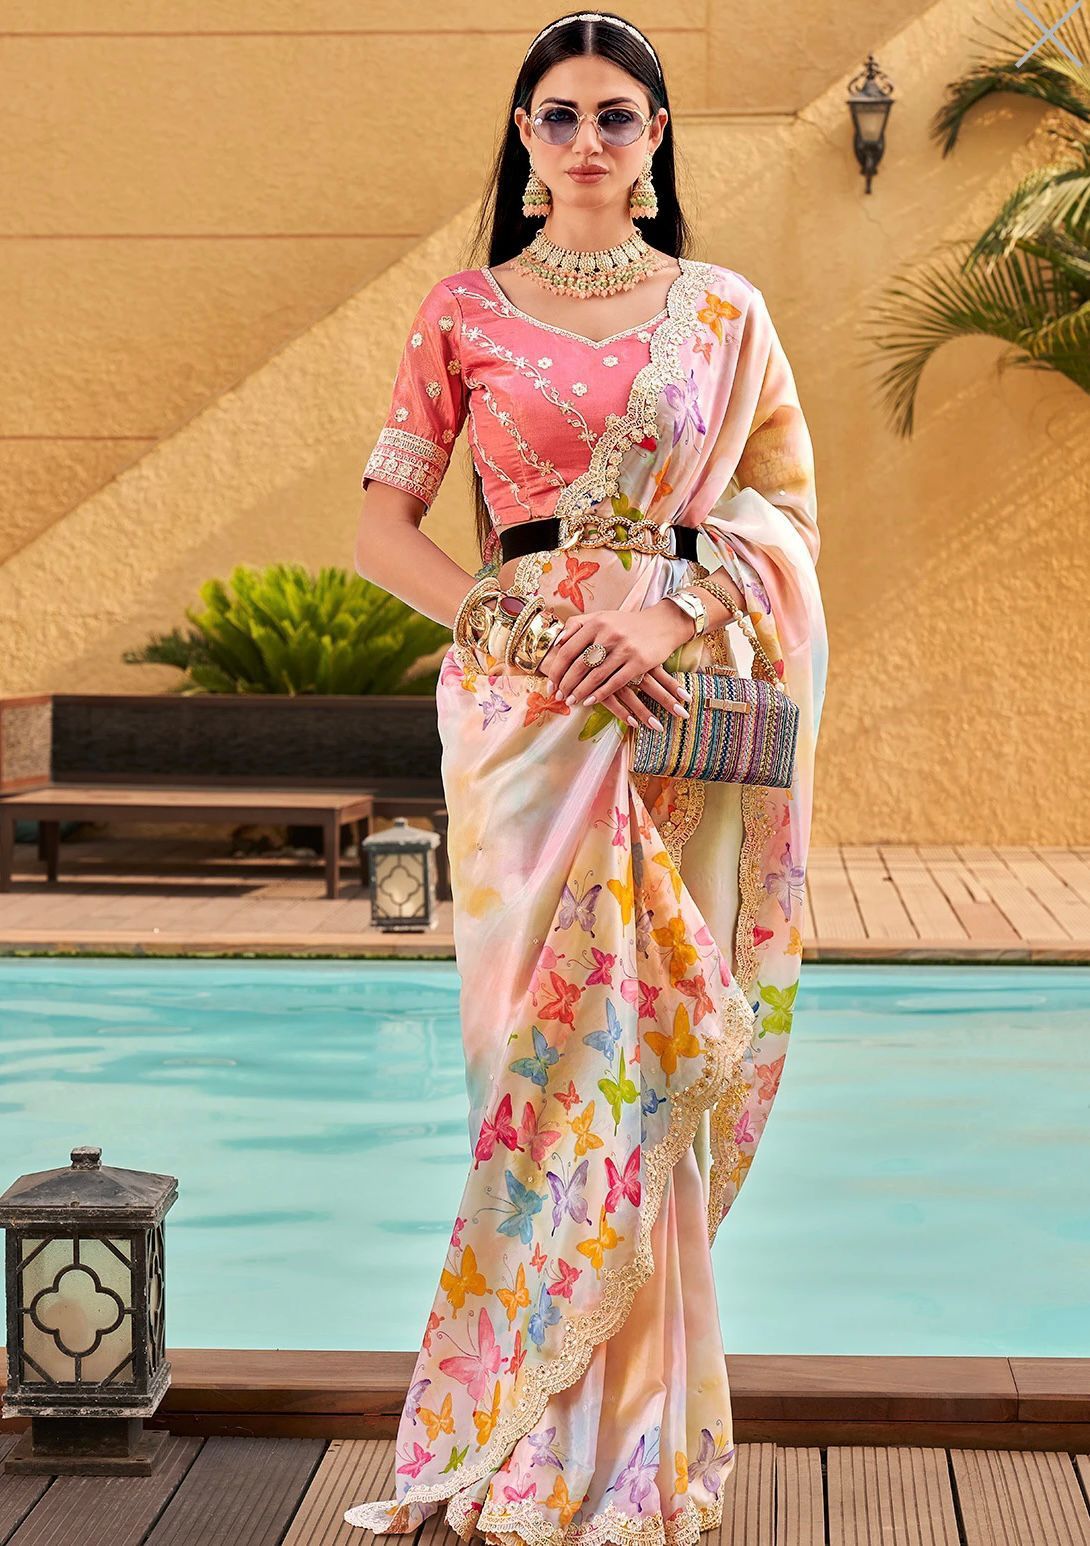 Introducing our exquisite "Enchanted Blooms" Collection: Georgette Sarees with Captivating Digital Prints!